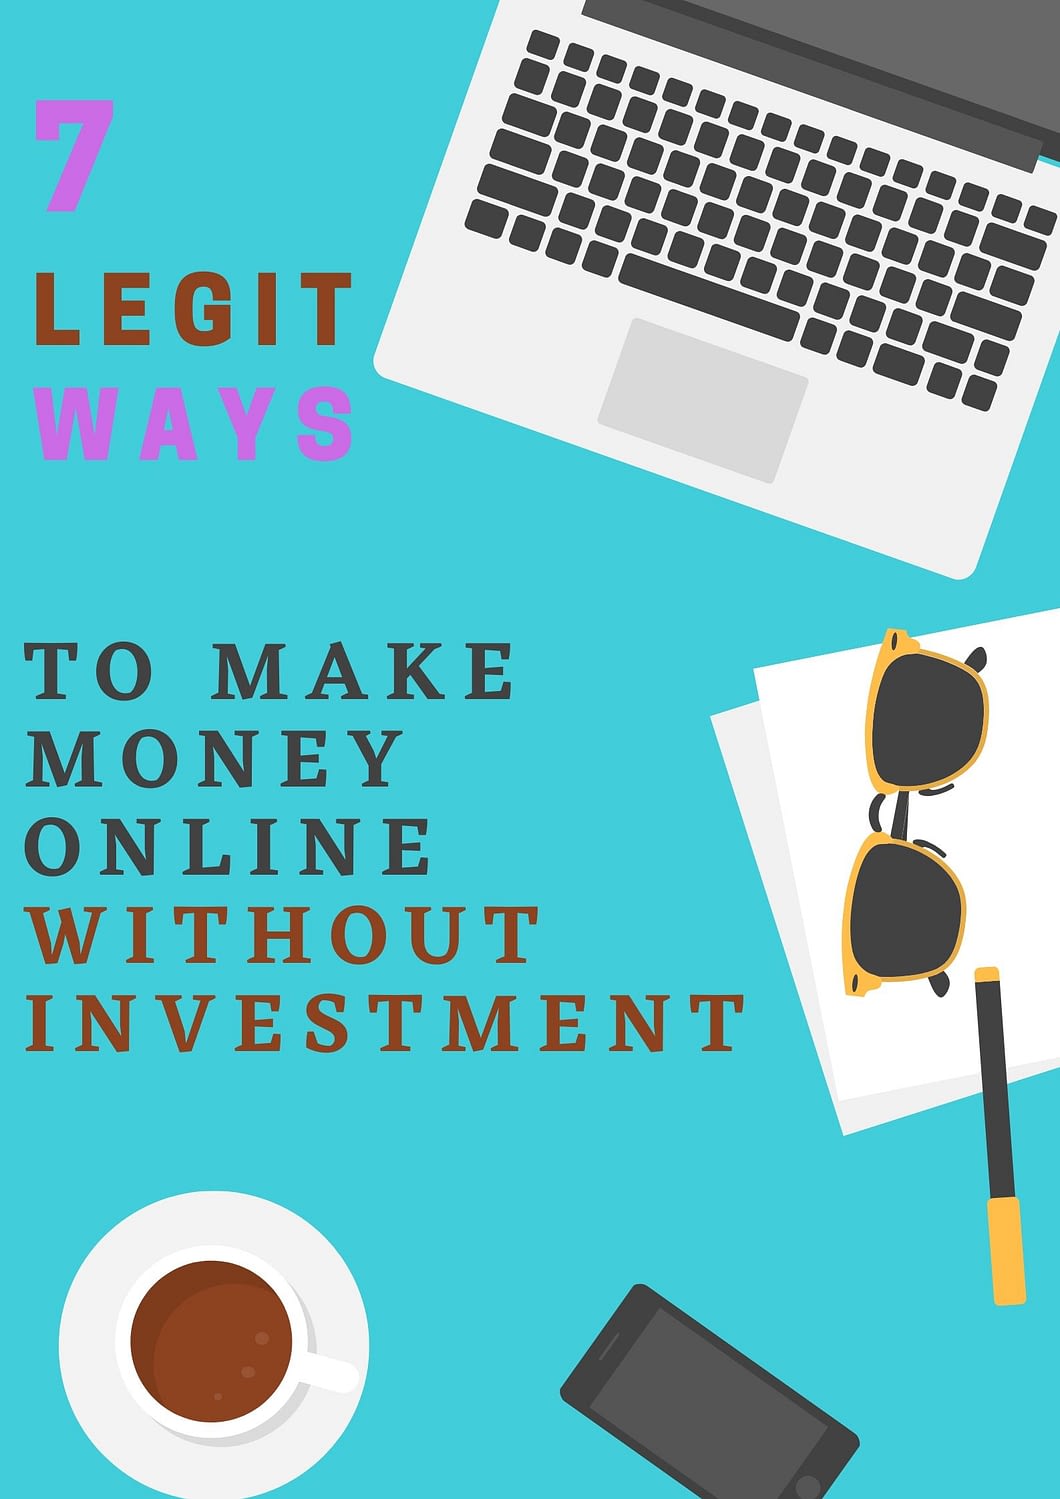 legit ways to earn online without investment